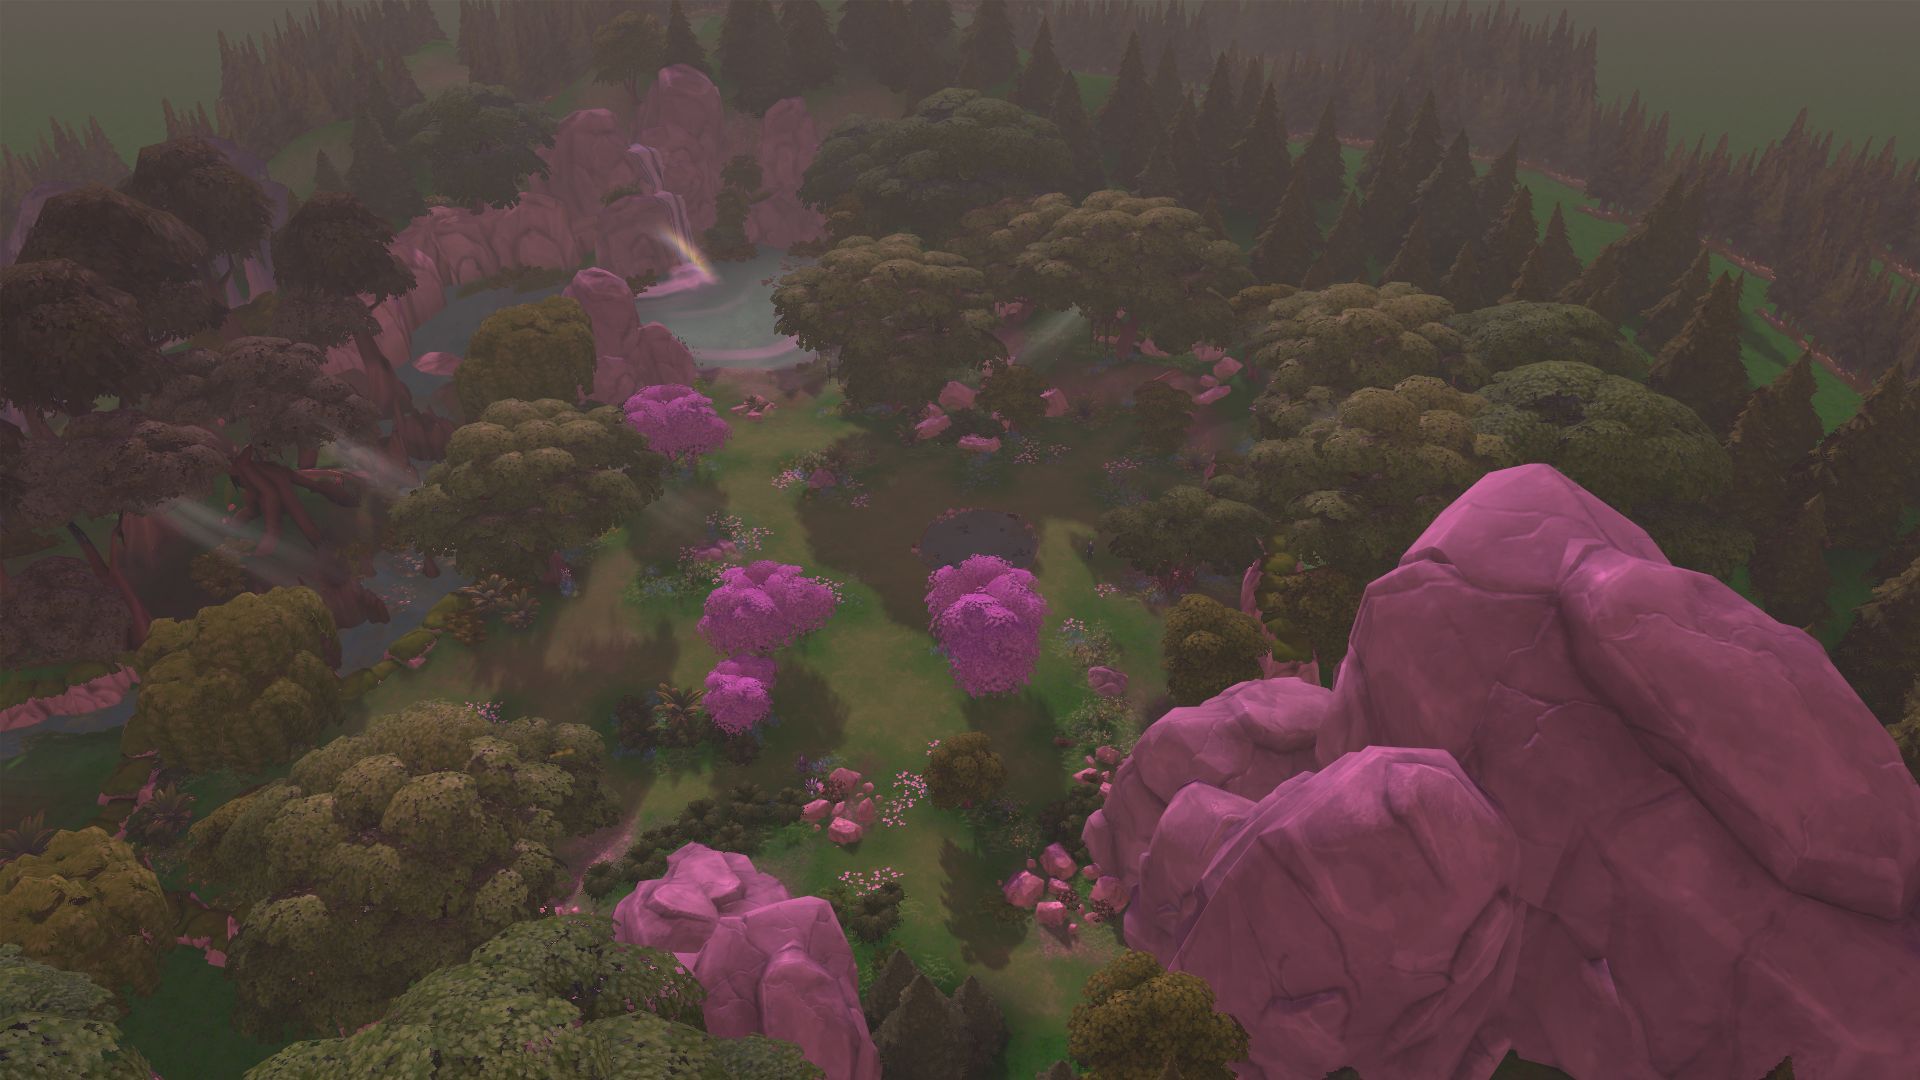 sylvan glade from above